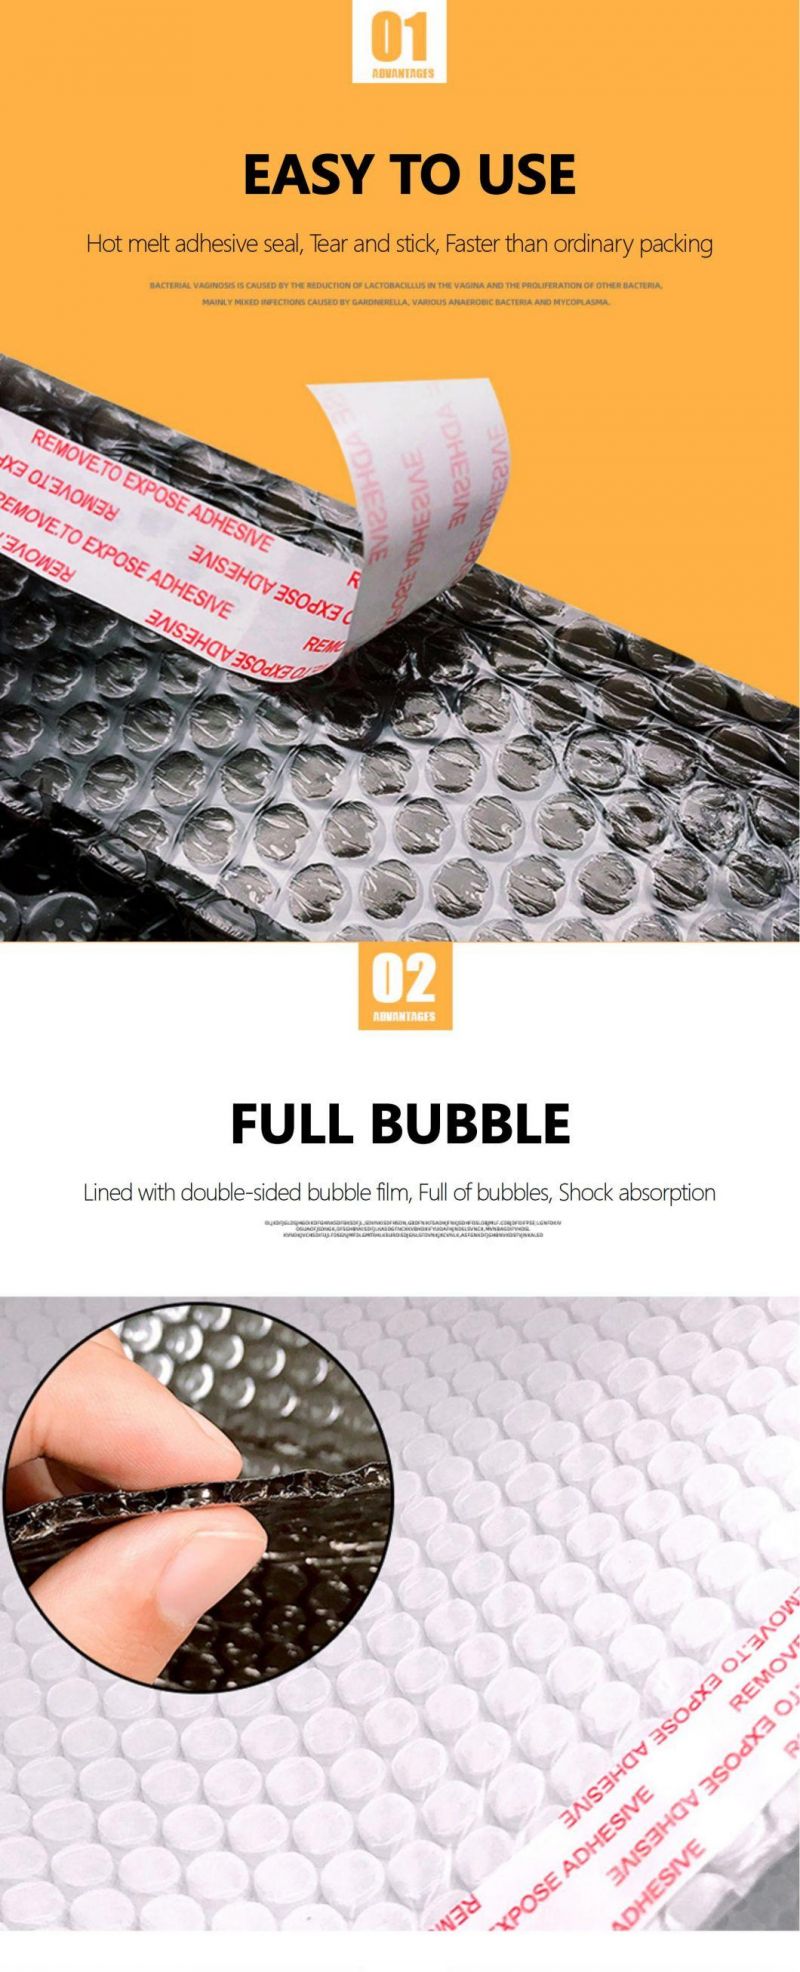 Bubble Mailers for Fragile